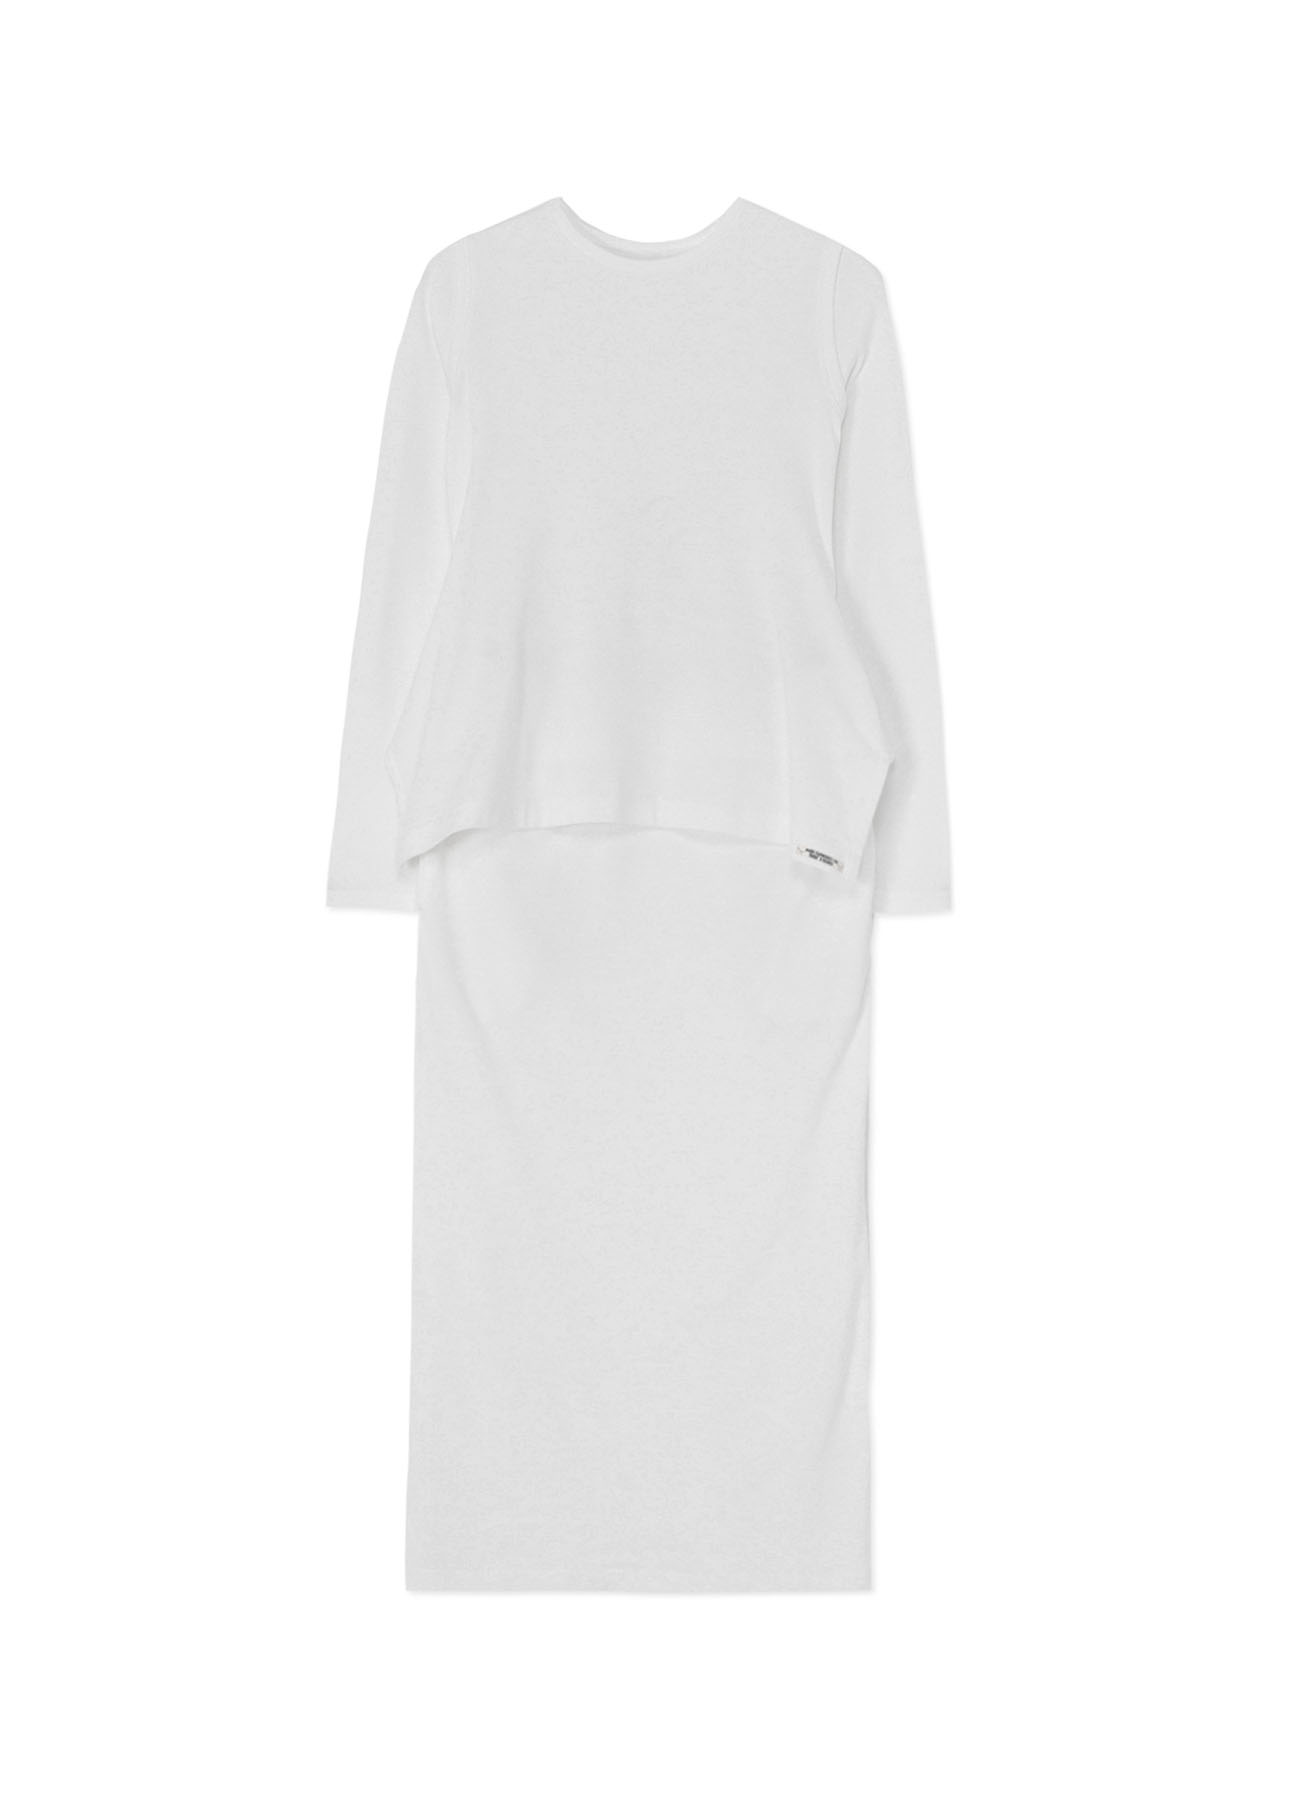 COMBED COTTON JERSEY DRESS